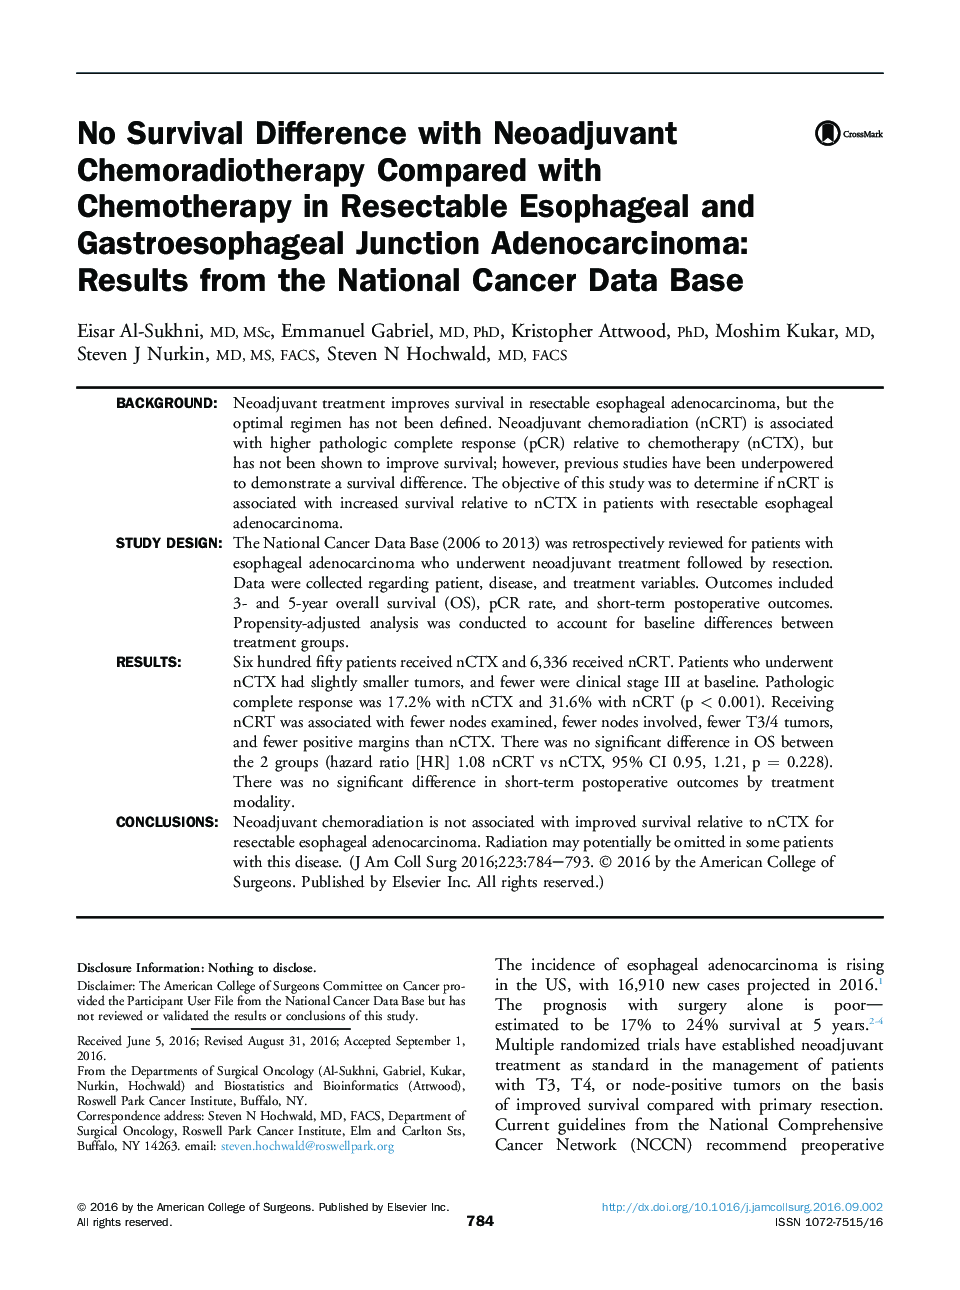 Original scientific articleNo Survival Difference with Neoadjuvant Chemoradiotherapy Compared with Chemotherapy in Resectable Esophageal and Gastroesophageal Junction Adenocarcinoma: ResultsÂ from the National Cancer Data Base